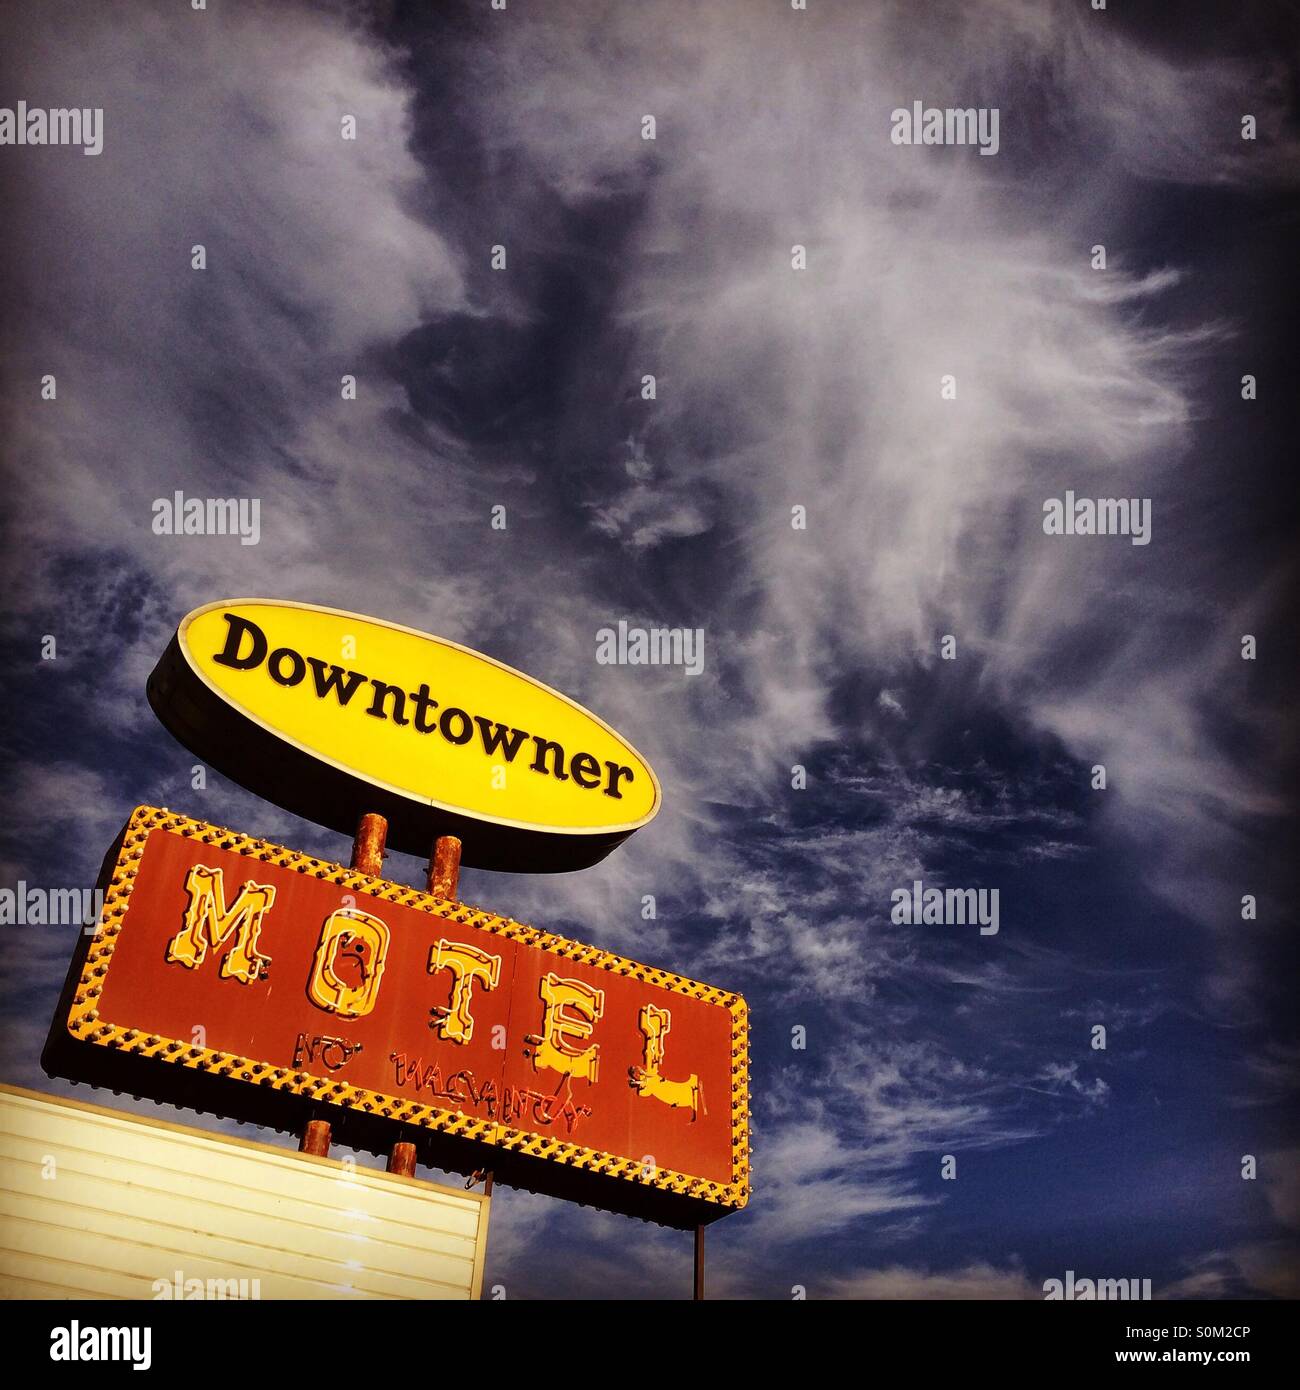 Downtowner Motel, sign and crazy sky, Houghton, Michigan Stock Photo